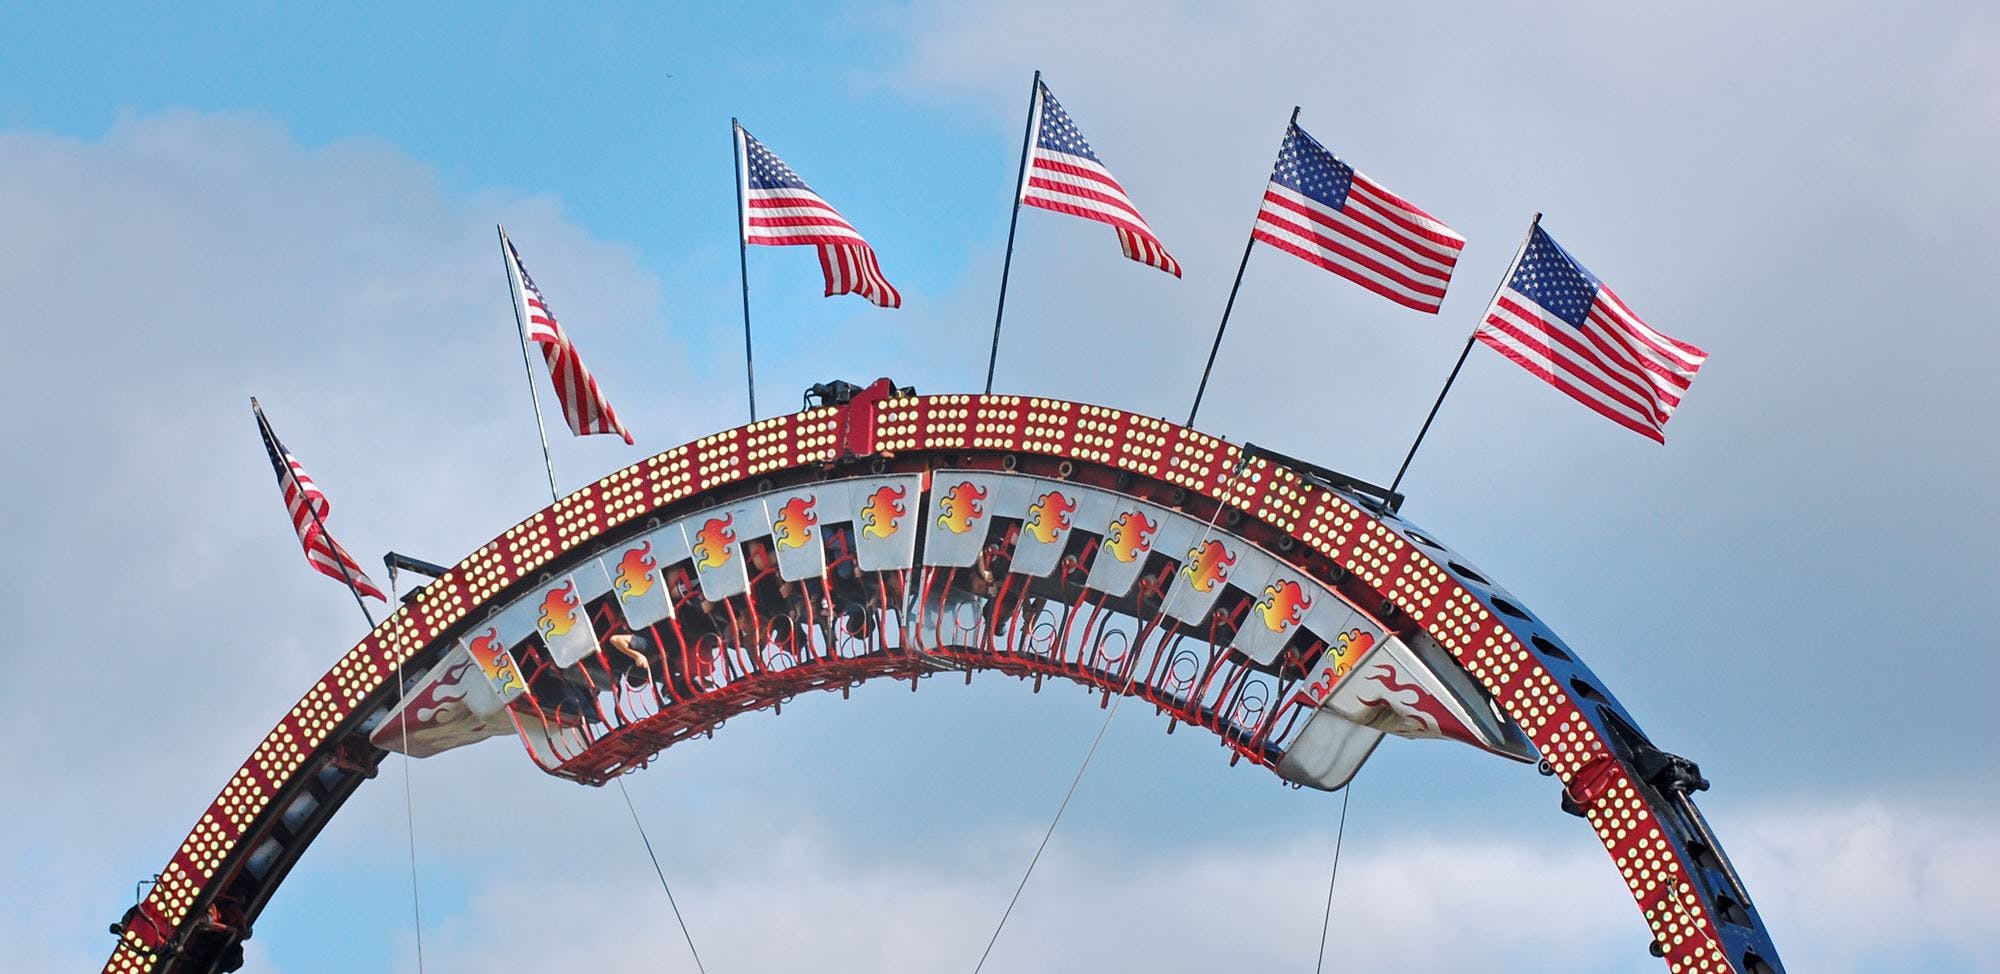 Photograph of a rollercoaster at The Big E, courtesy of Eastern States Exhibition. https://www.thebige.com/